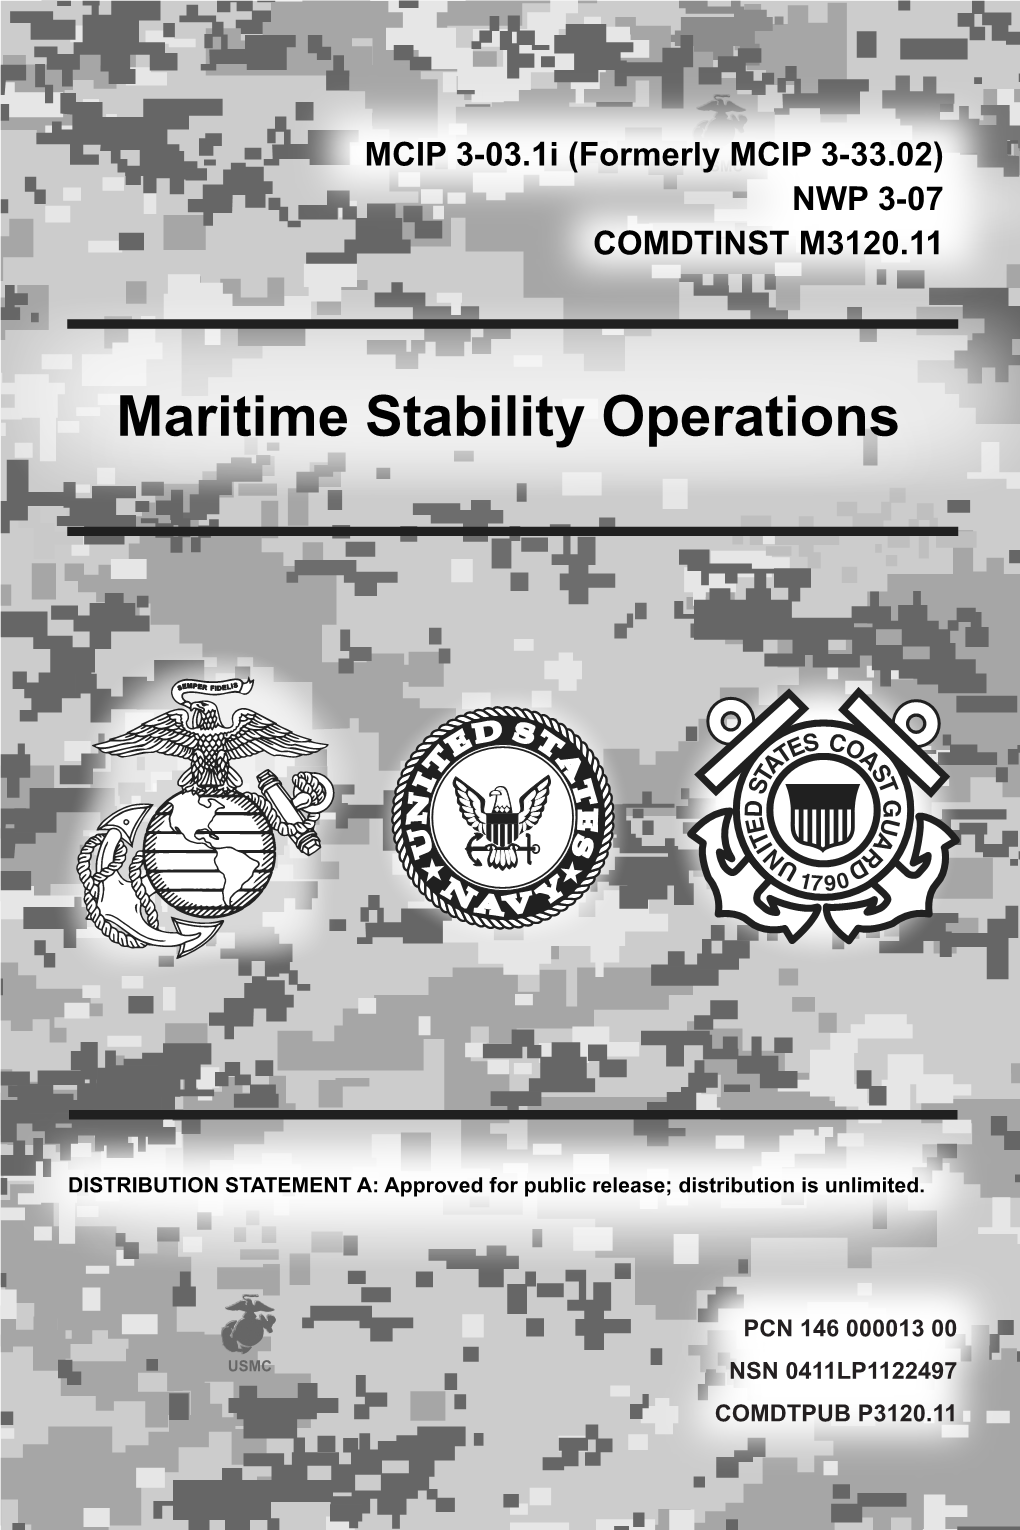 Maritime Stability Operations